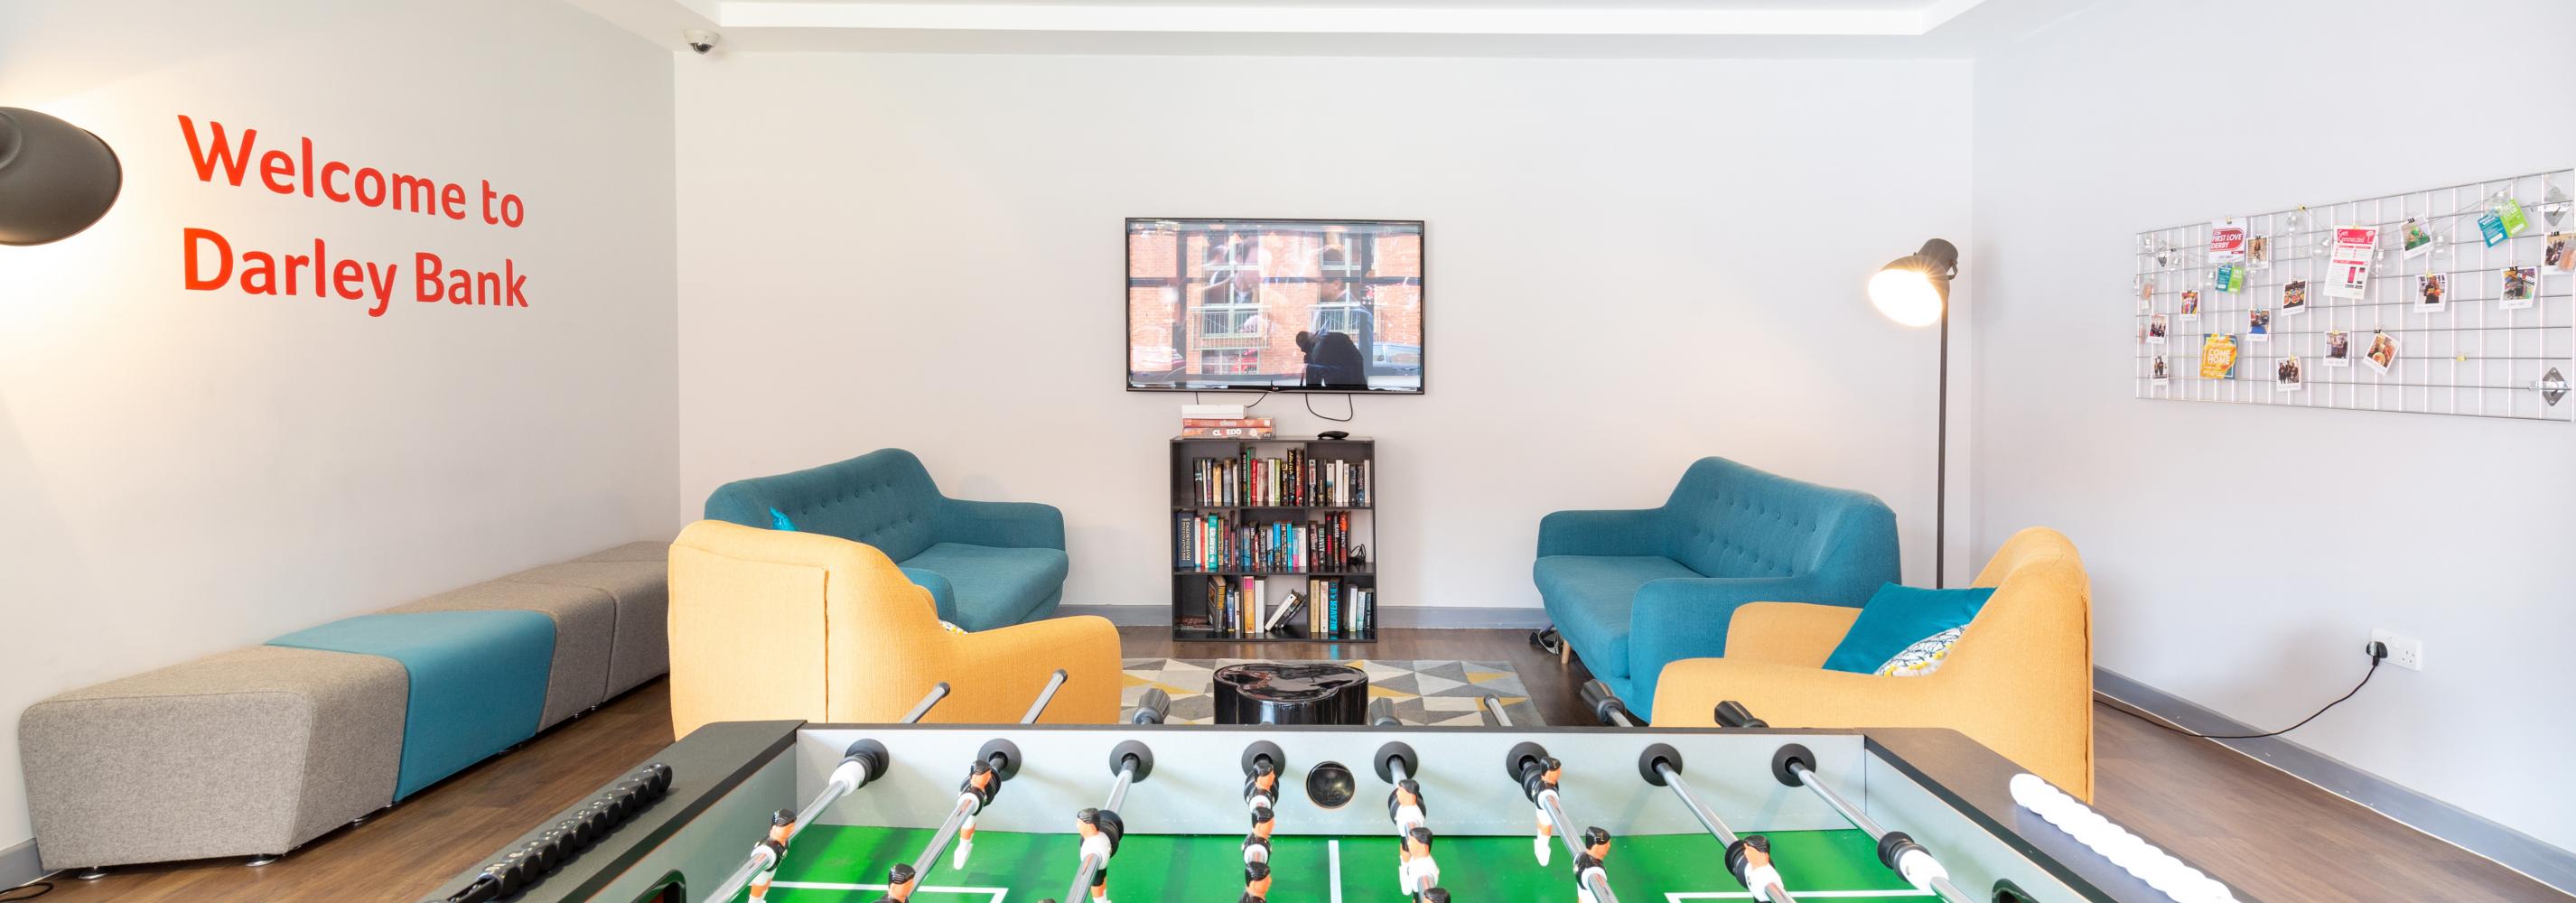 Common room with sofas, lamp, bookshelf and table football